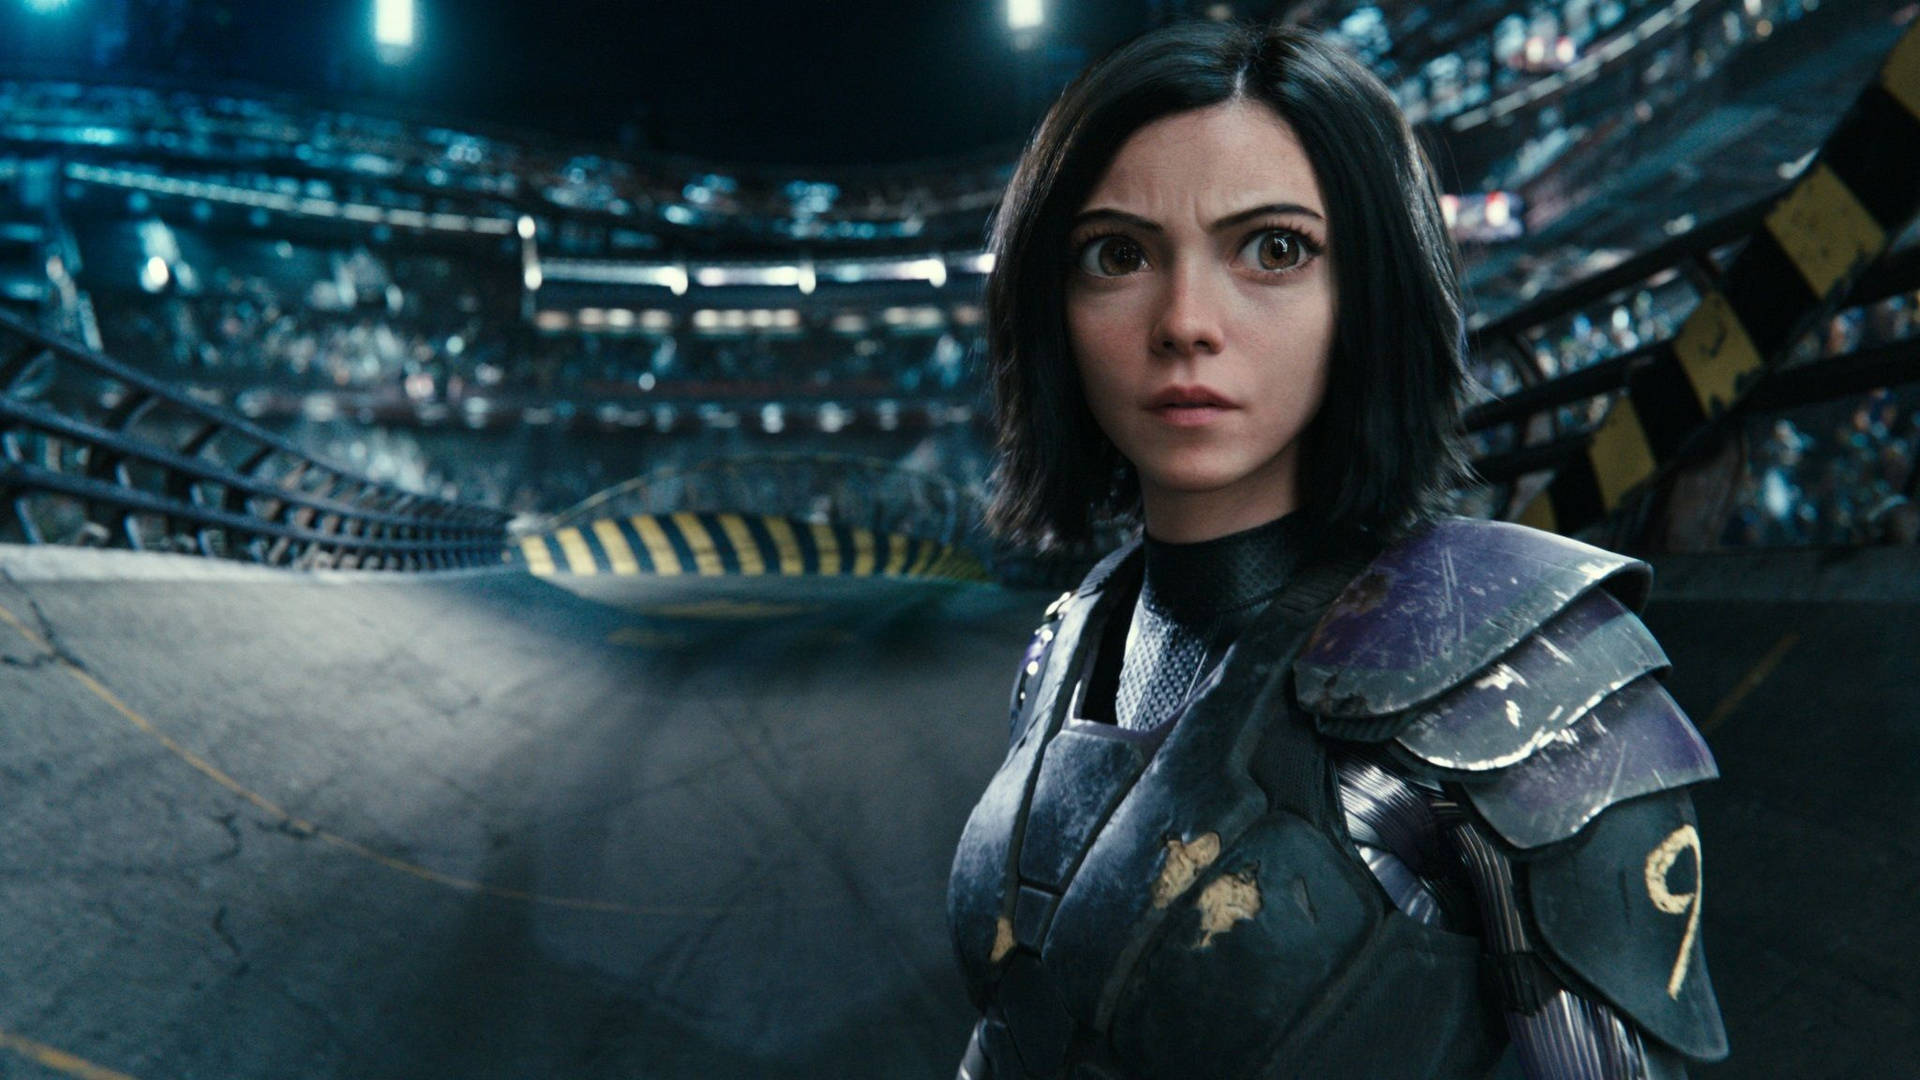 Ready for battle, Alita takes the fight to the streets in her advanced armor Wallpaper